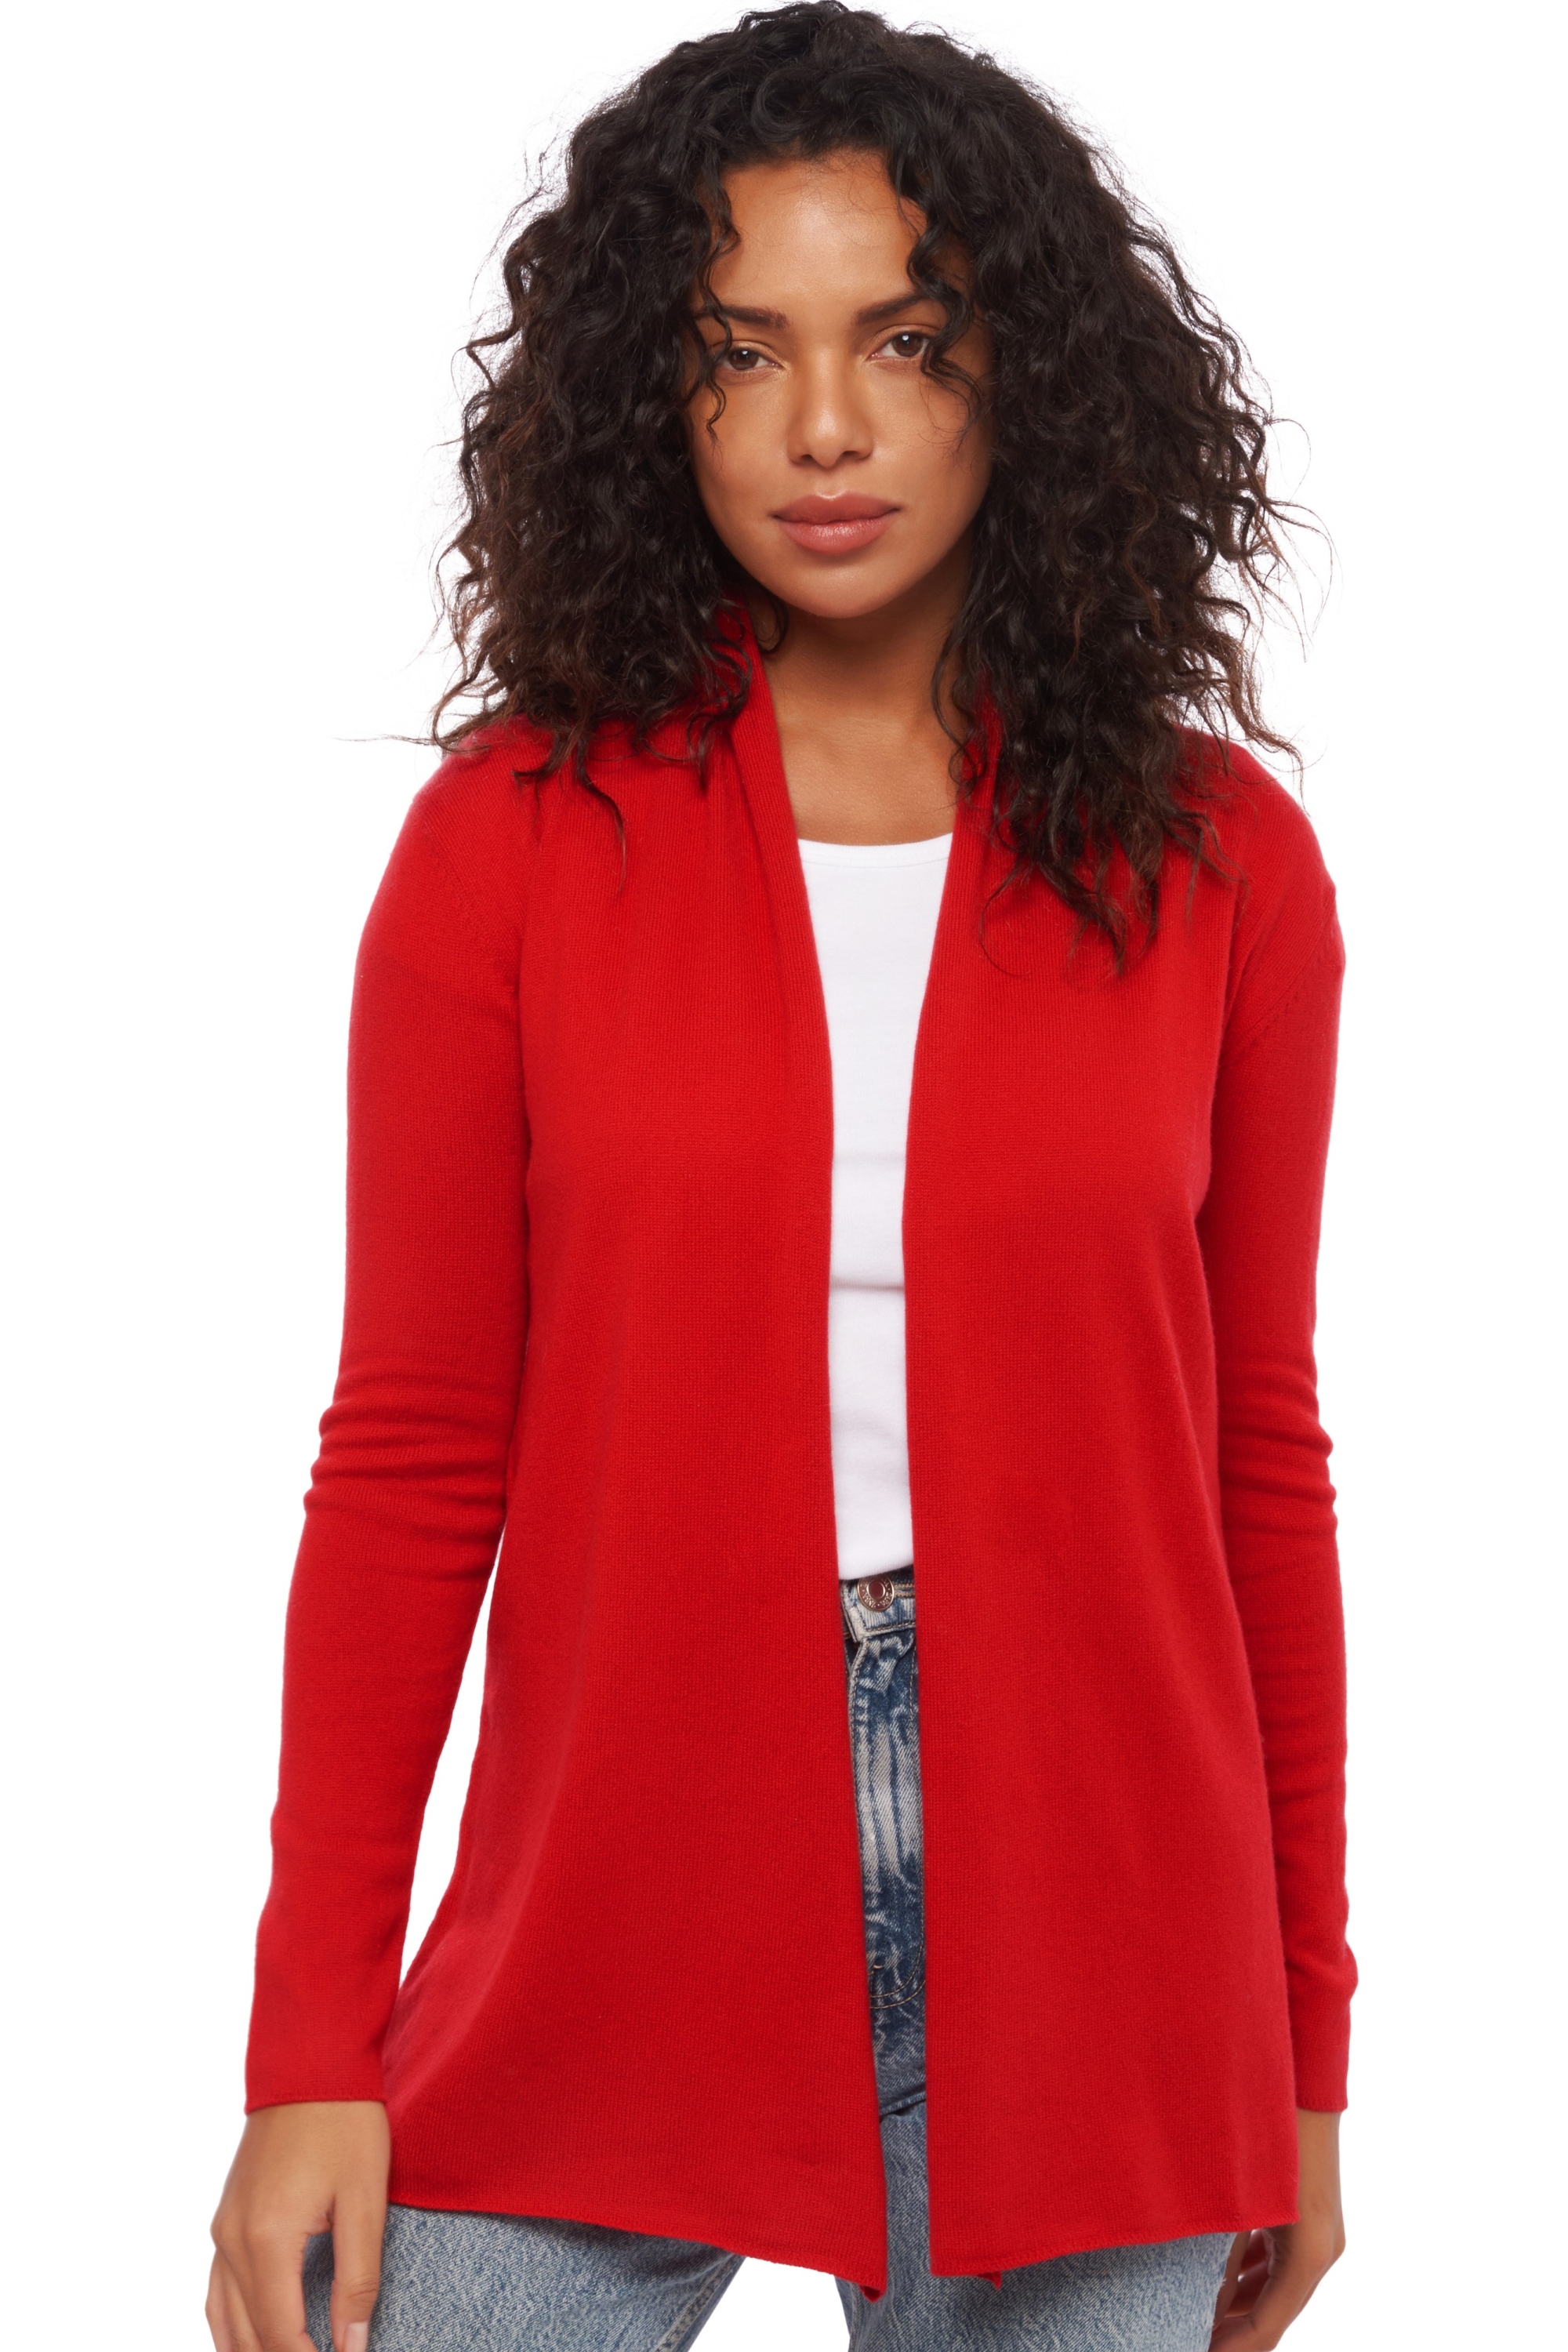 Cashmere ladies cardigans pucci blood red m